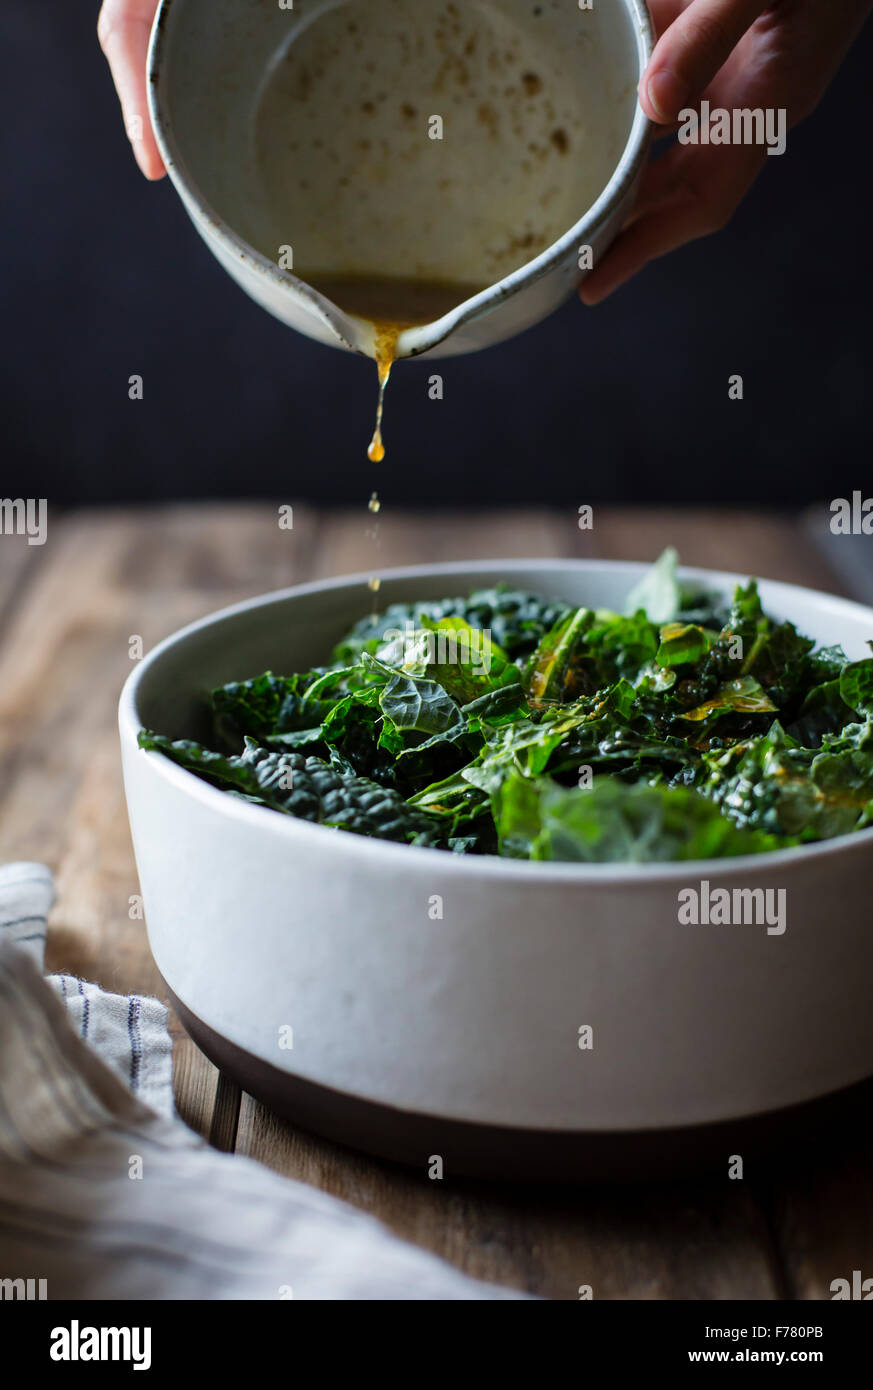 Pouring salad dressing over kale Stock Photo